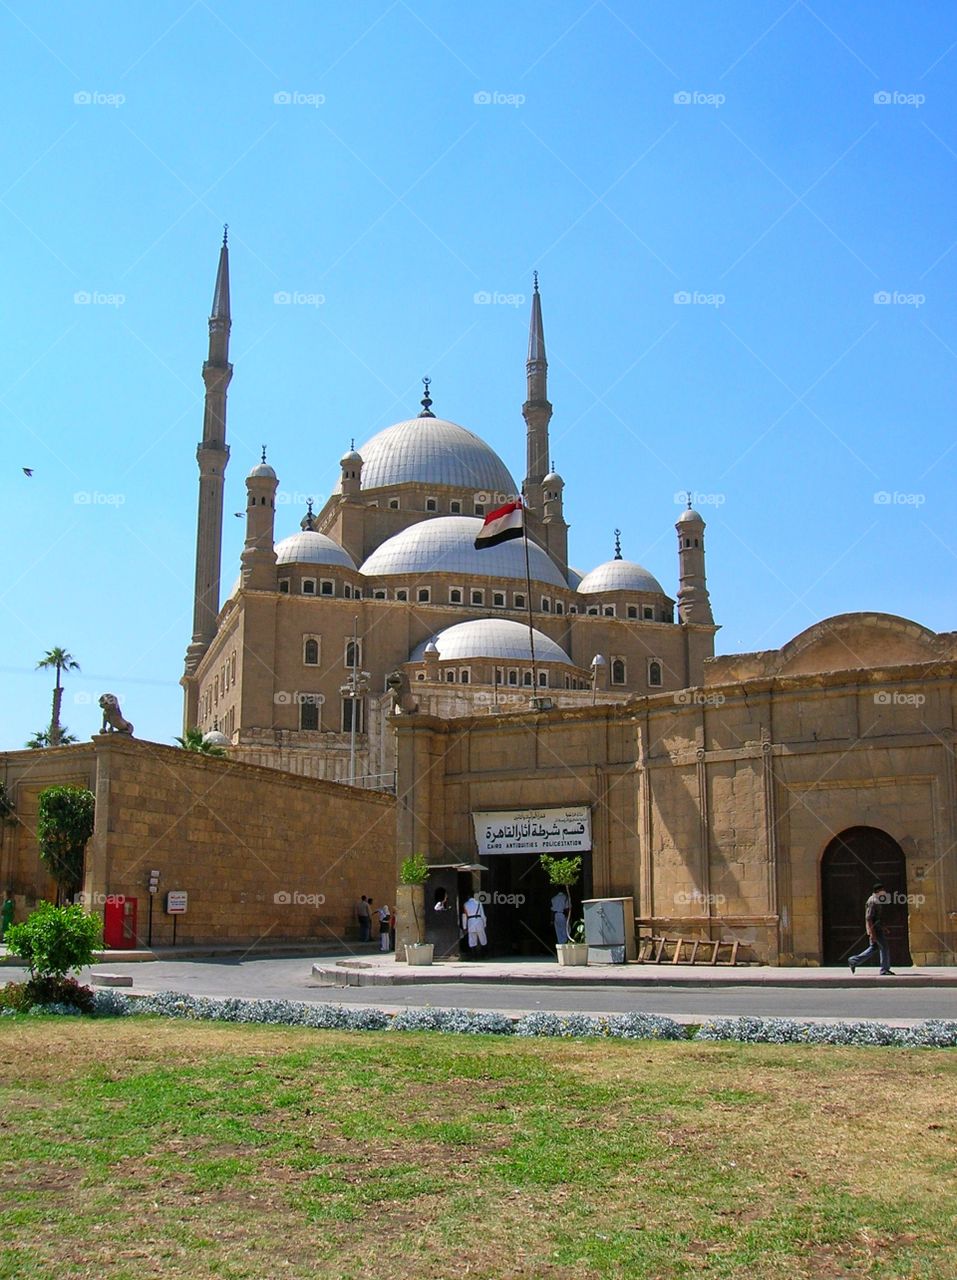 Beautiful day at the Citadel in Cairo, Egypt.